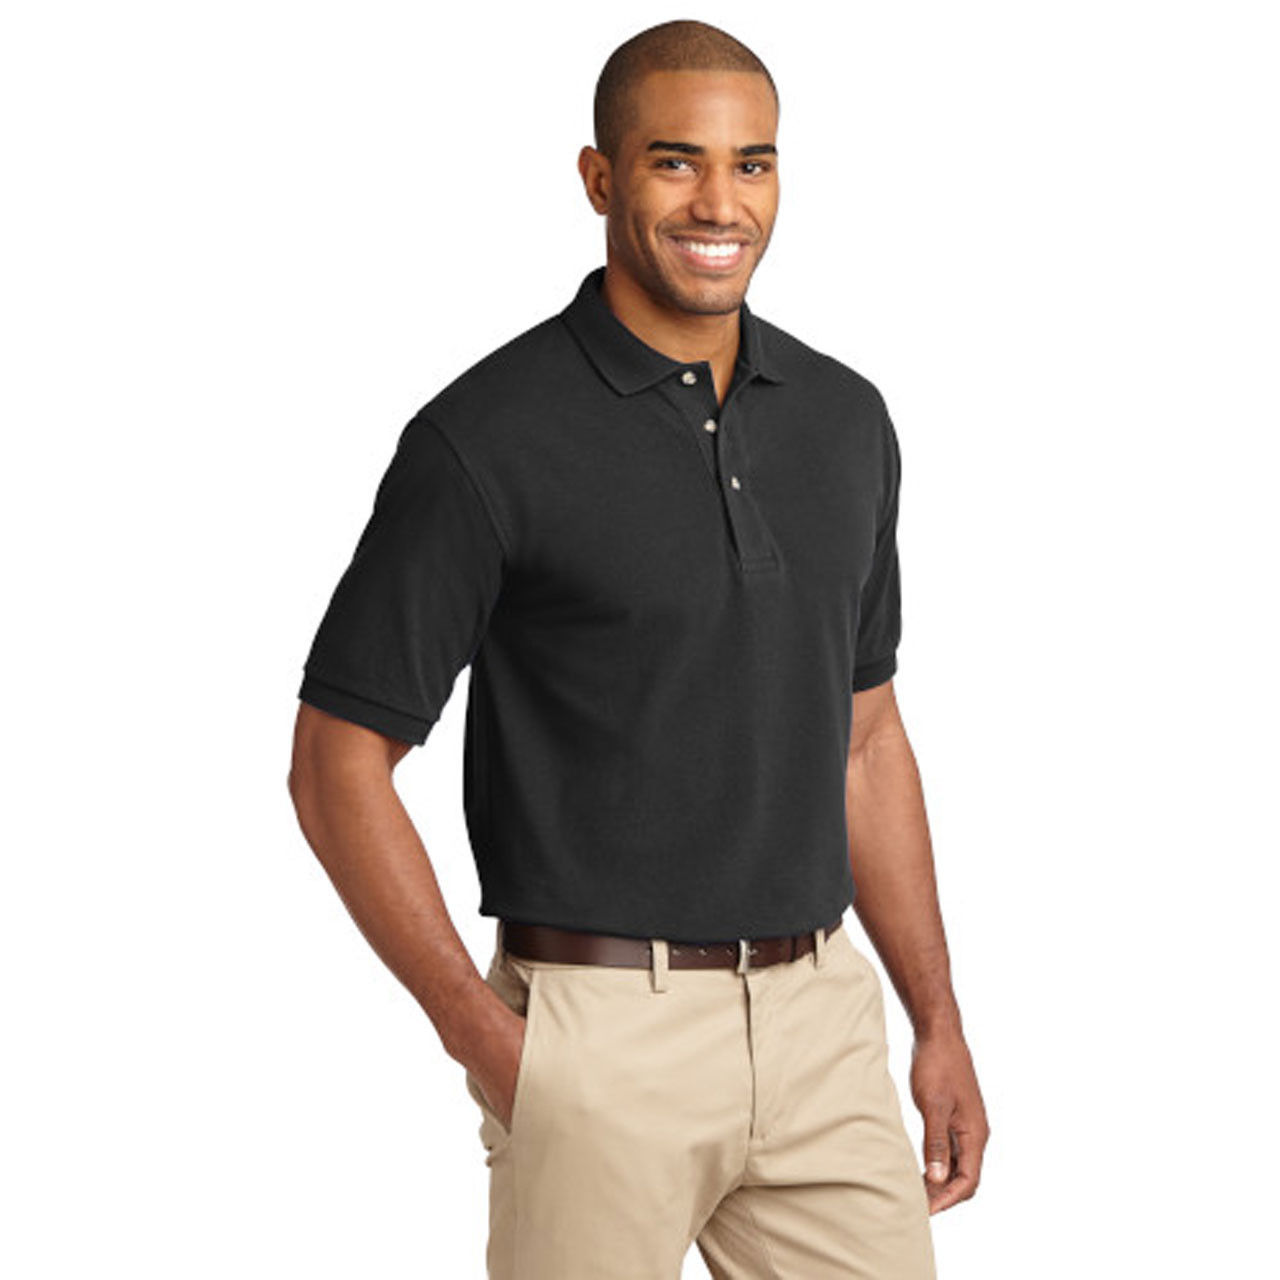 What model is the 100 cotton polo shirts wholesale in men's heavyweight pique?